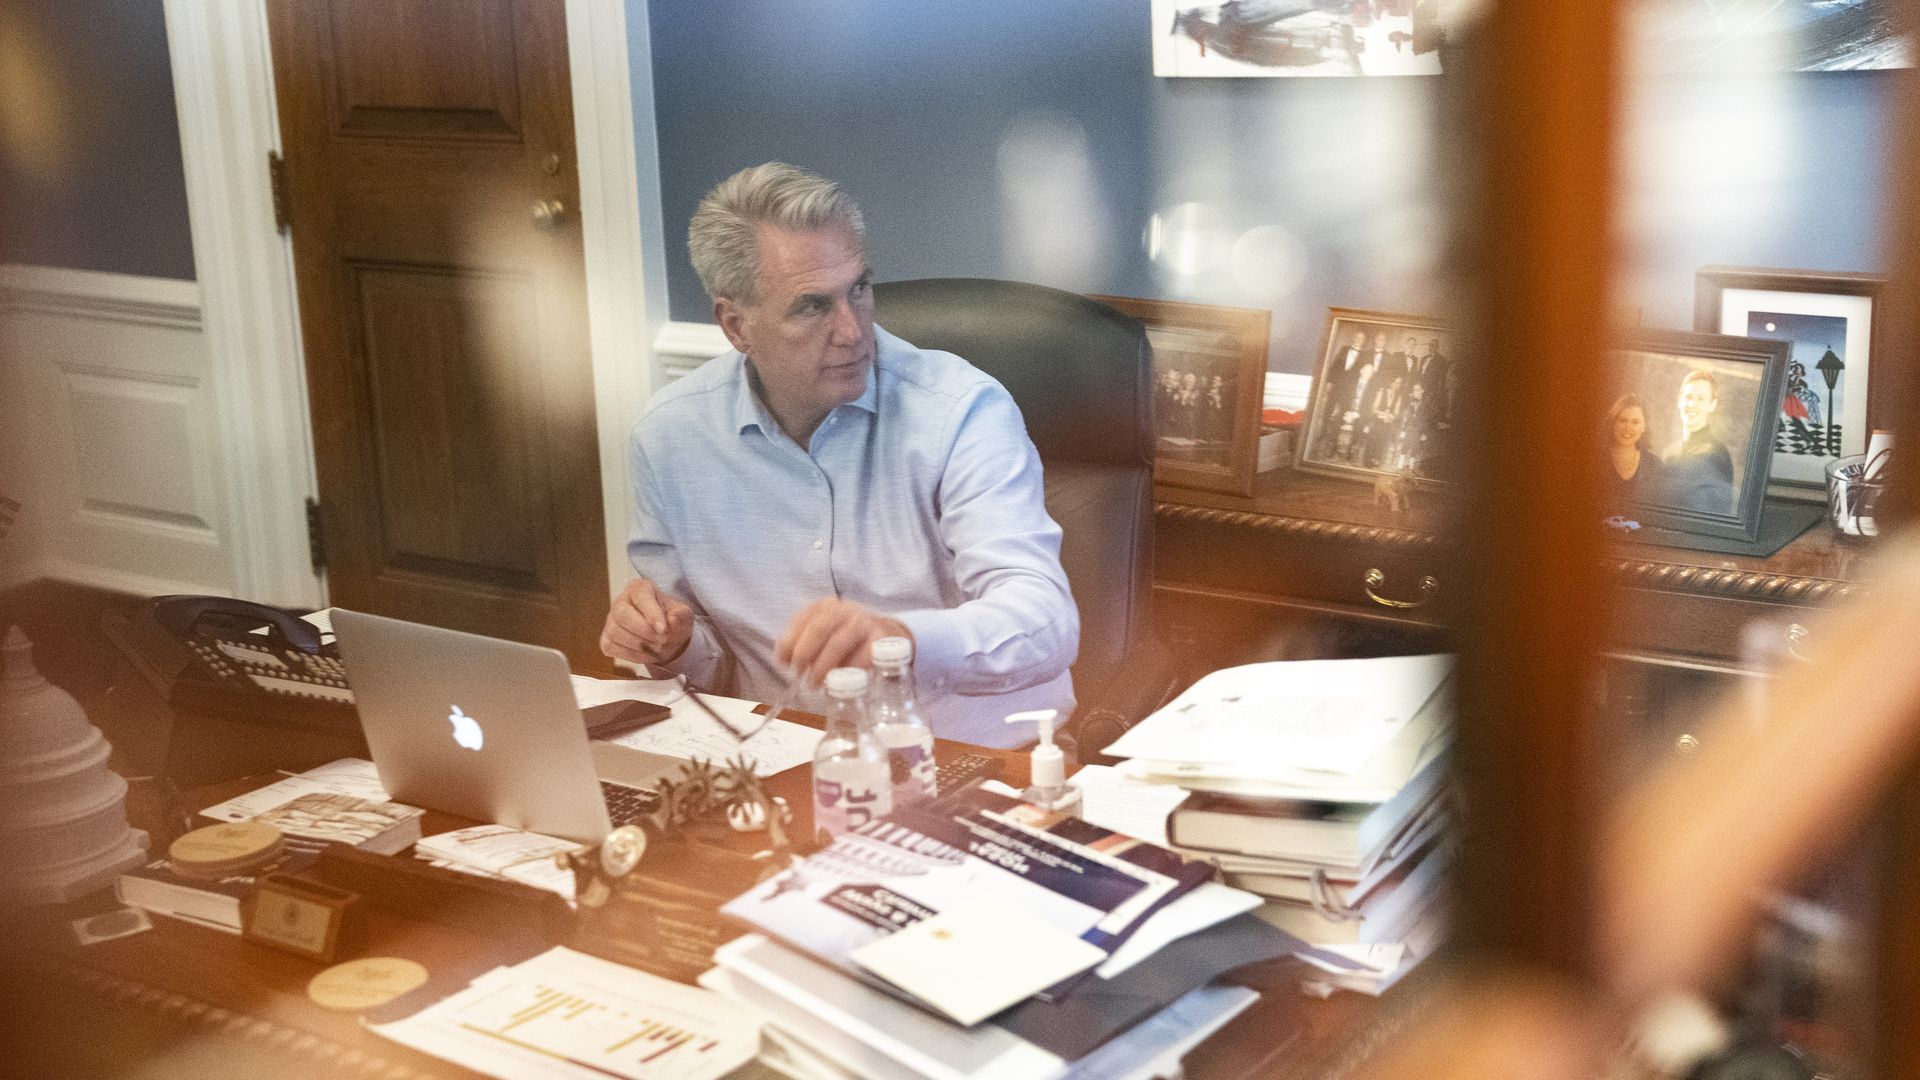 A photo of House Minority Leader Kevin McCarthy, through what appears to be a window. 